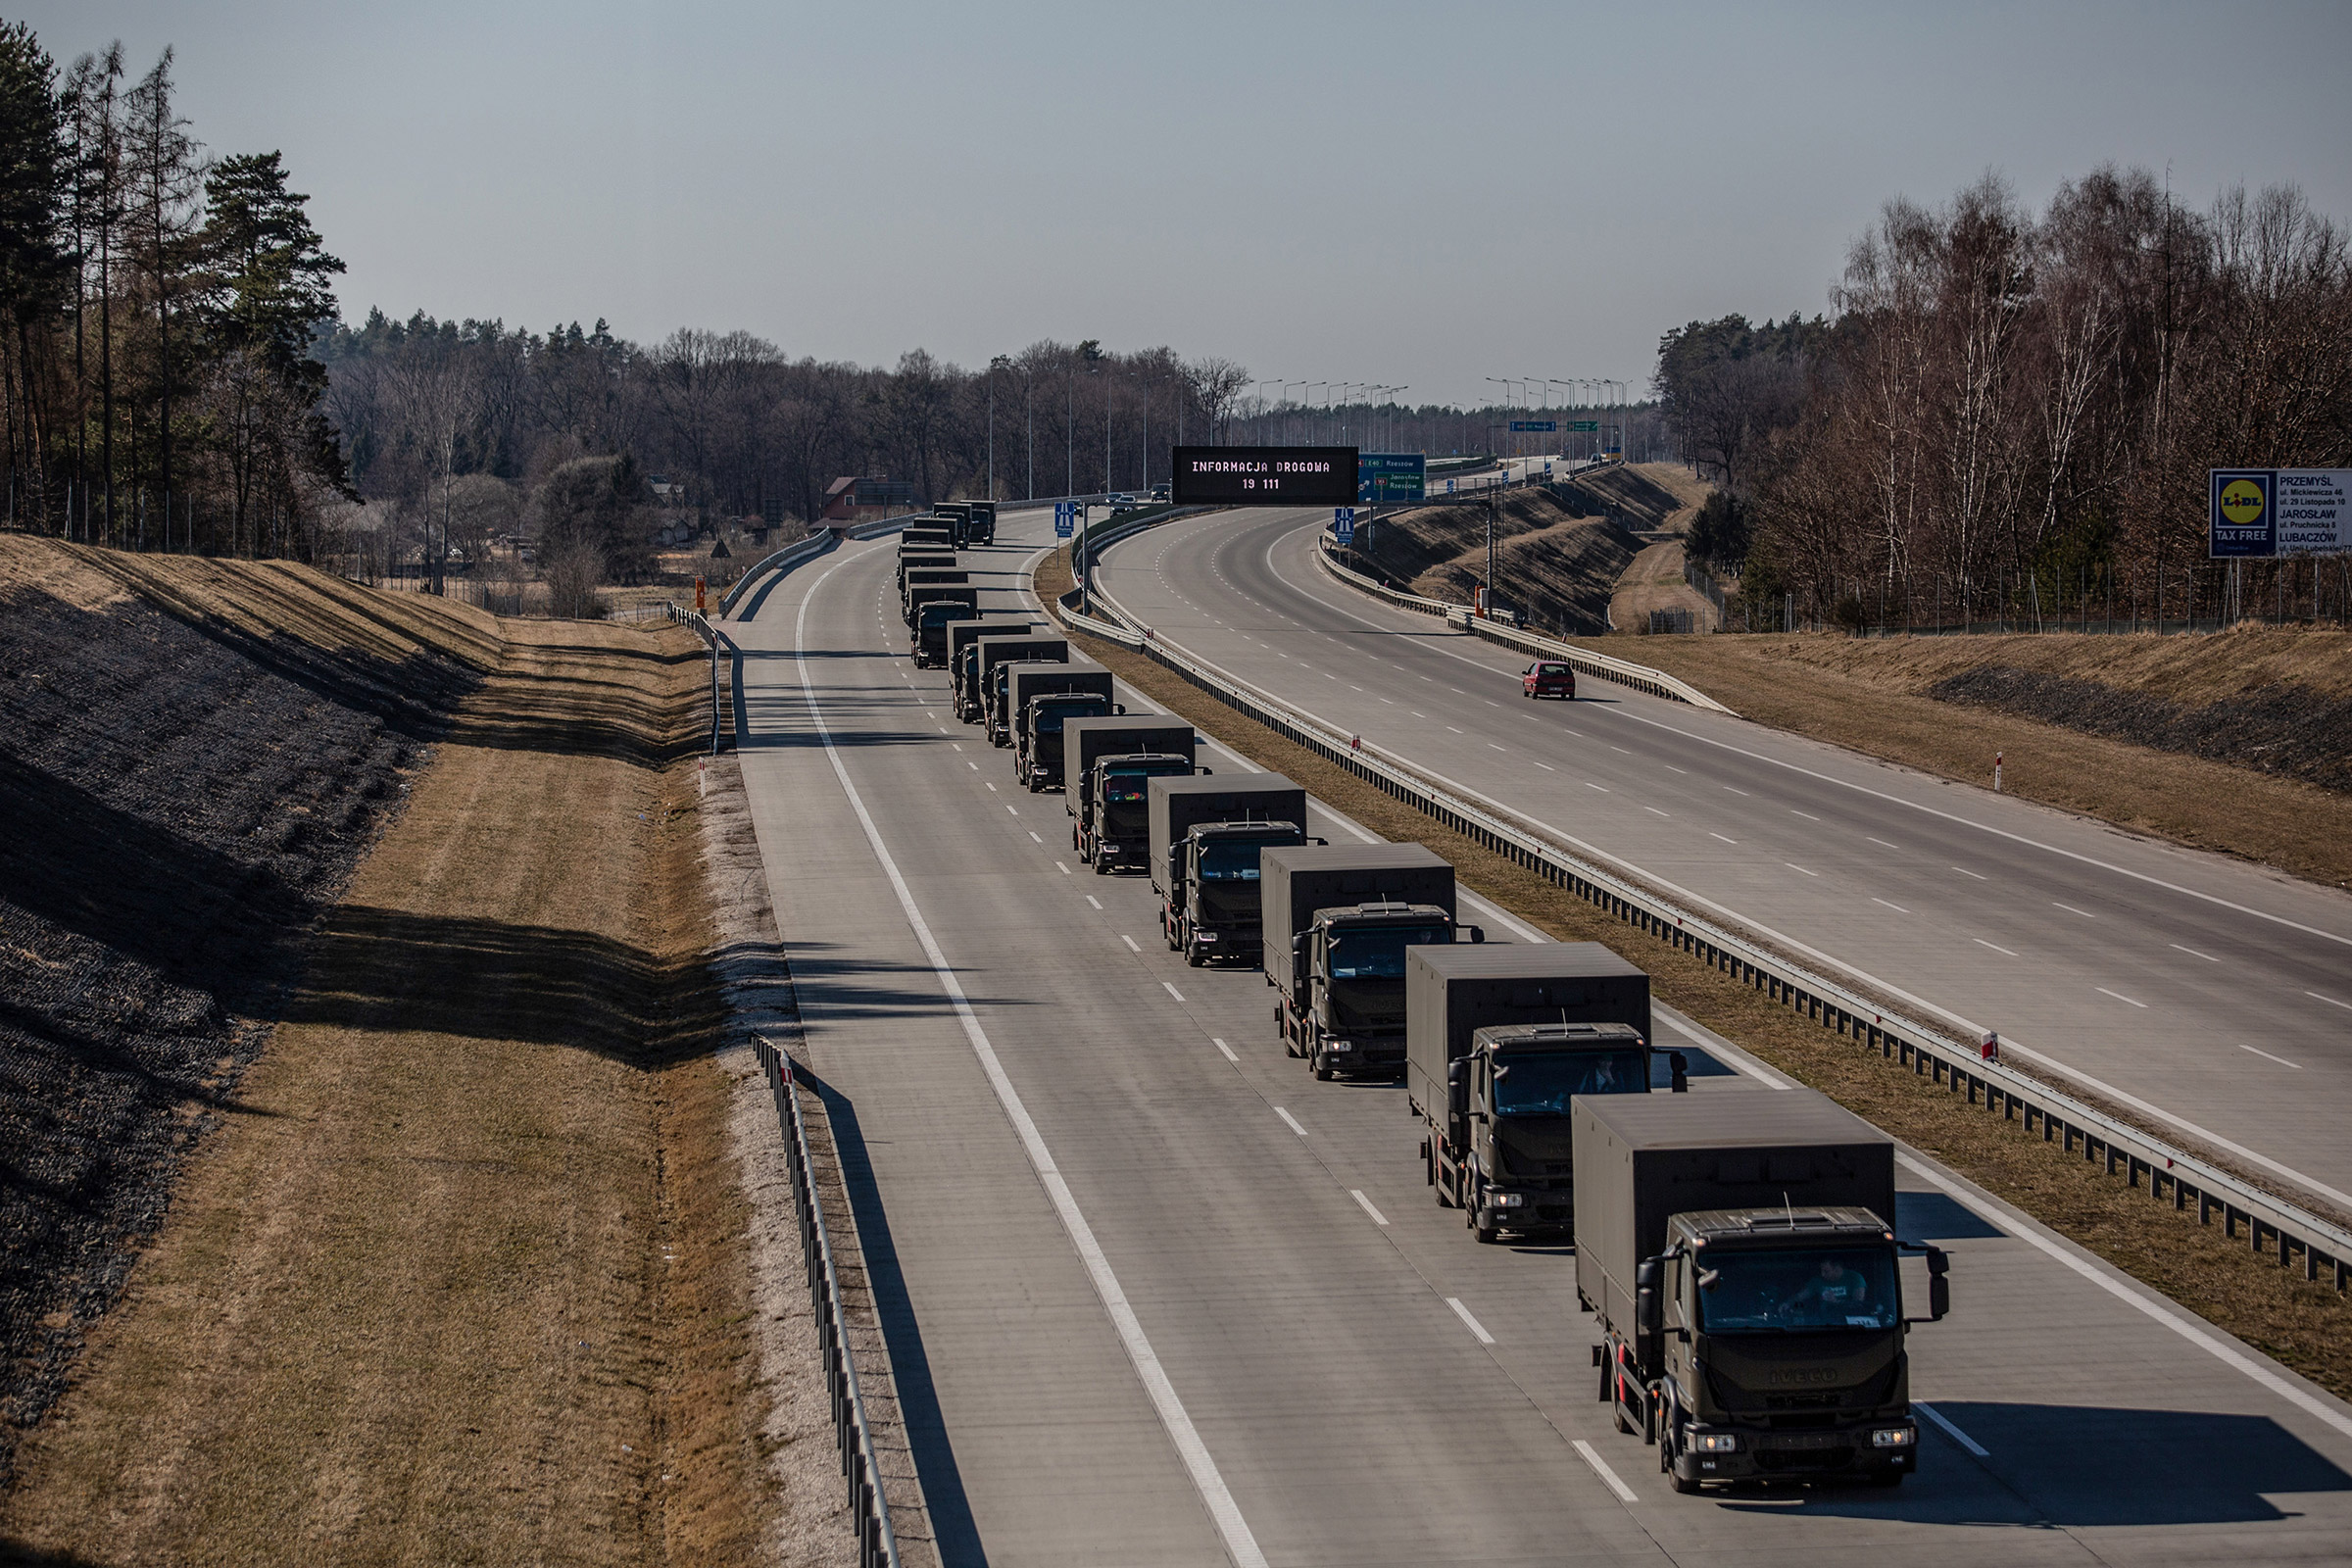 A convoy of unmarked trucks carrying supplies for Ukraine passes through Korczowa, Poland, on March 17